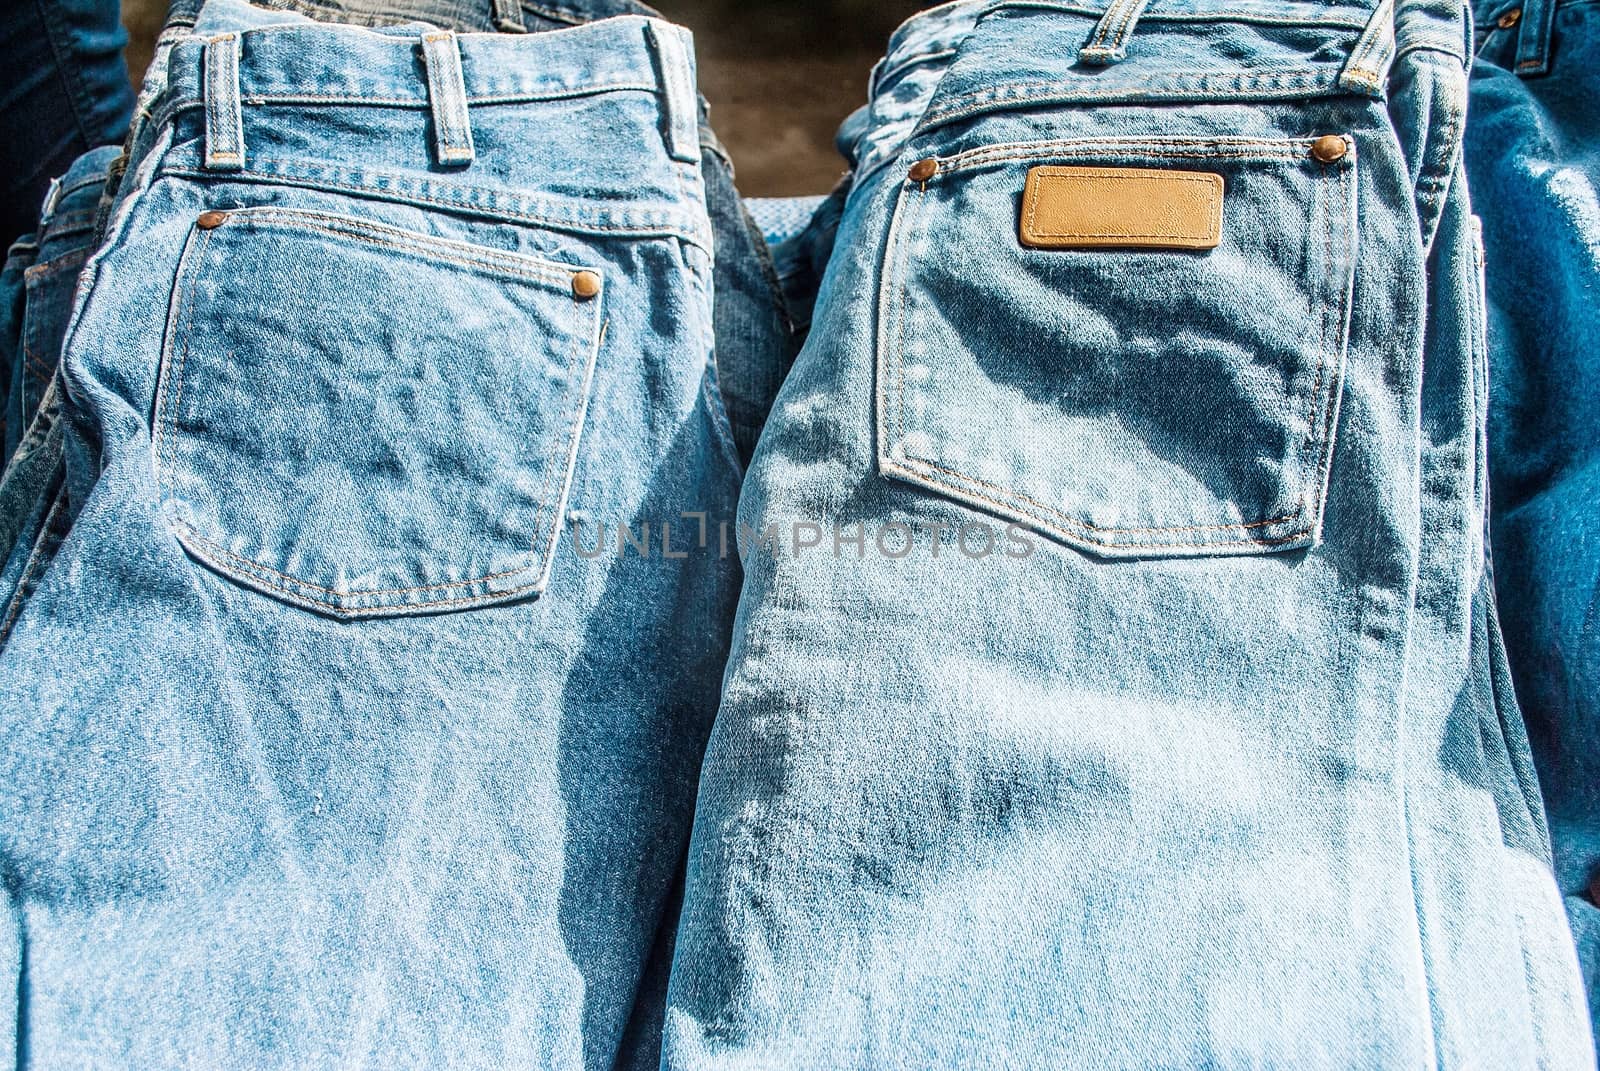 Lot of different blue jeans Blue Jeans by rakoptonLPN